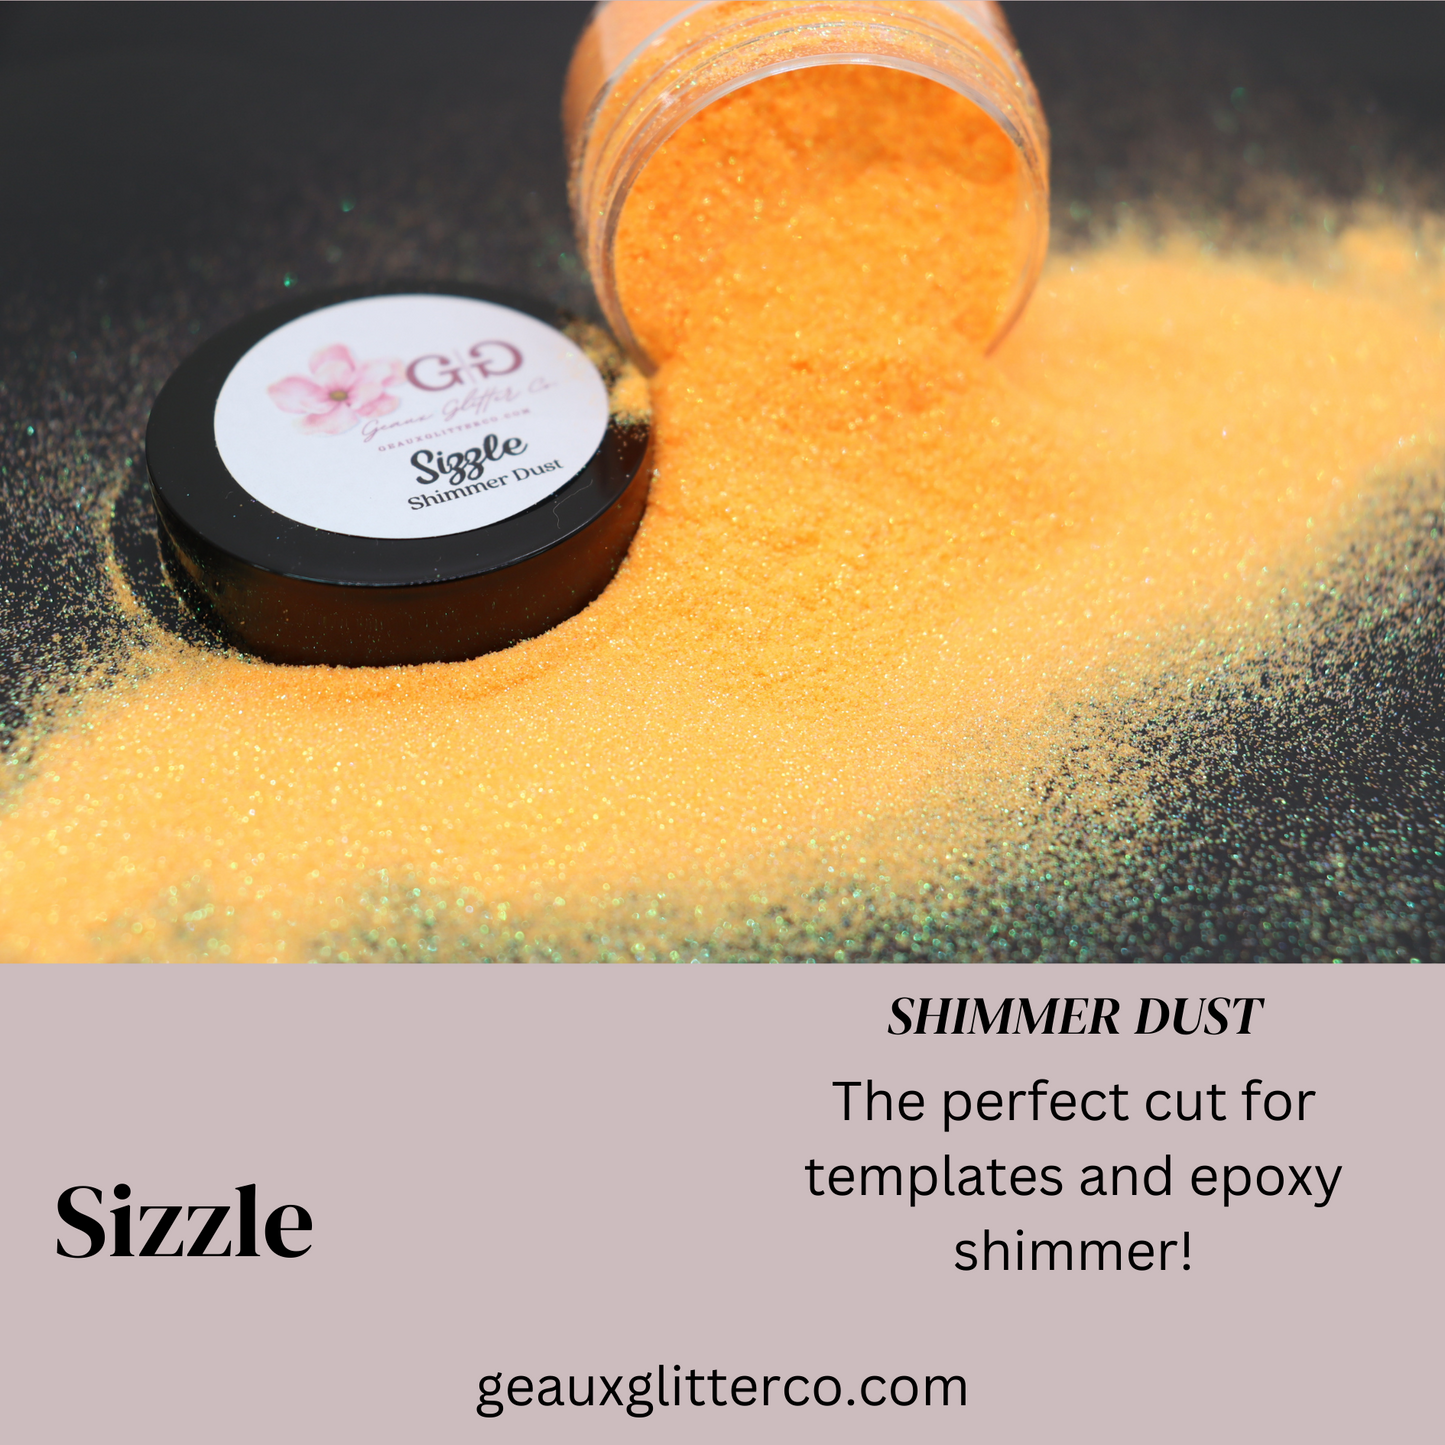 Sizzle Shimmer Dust